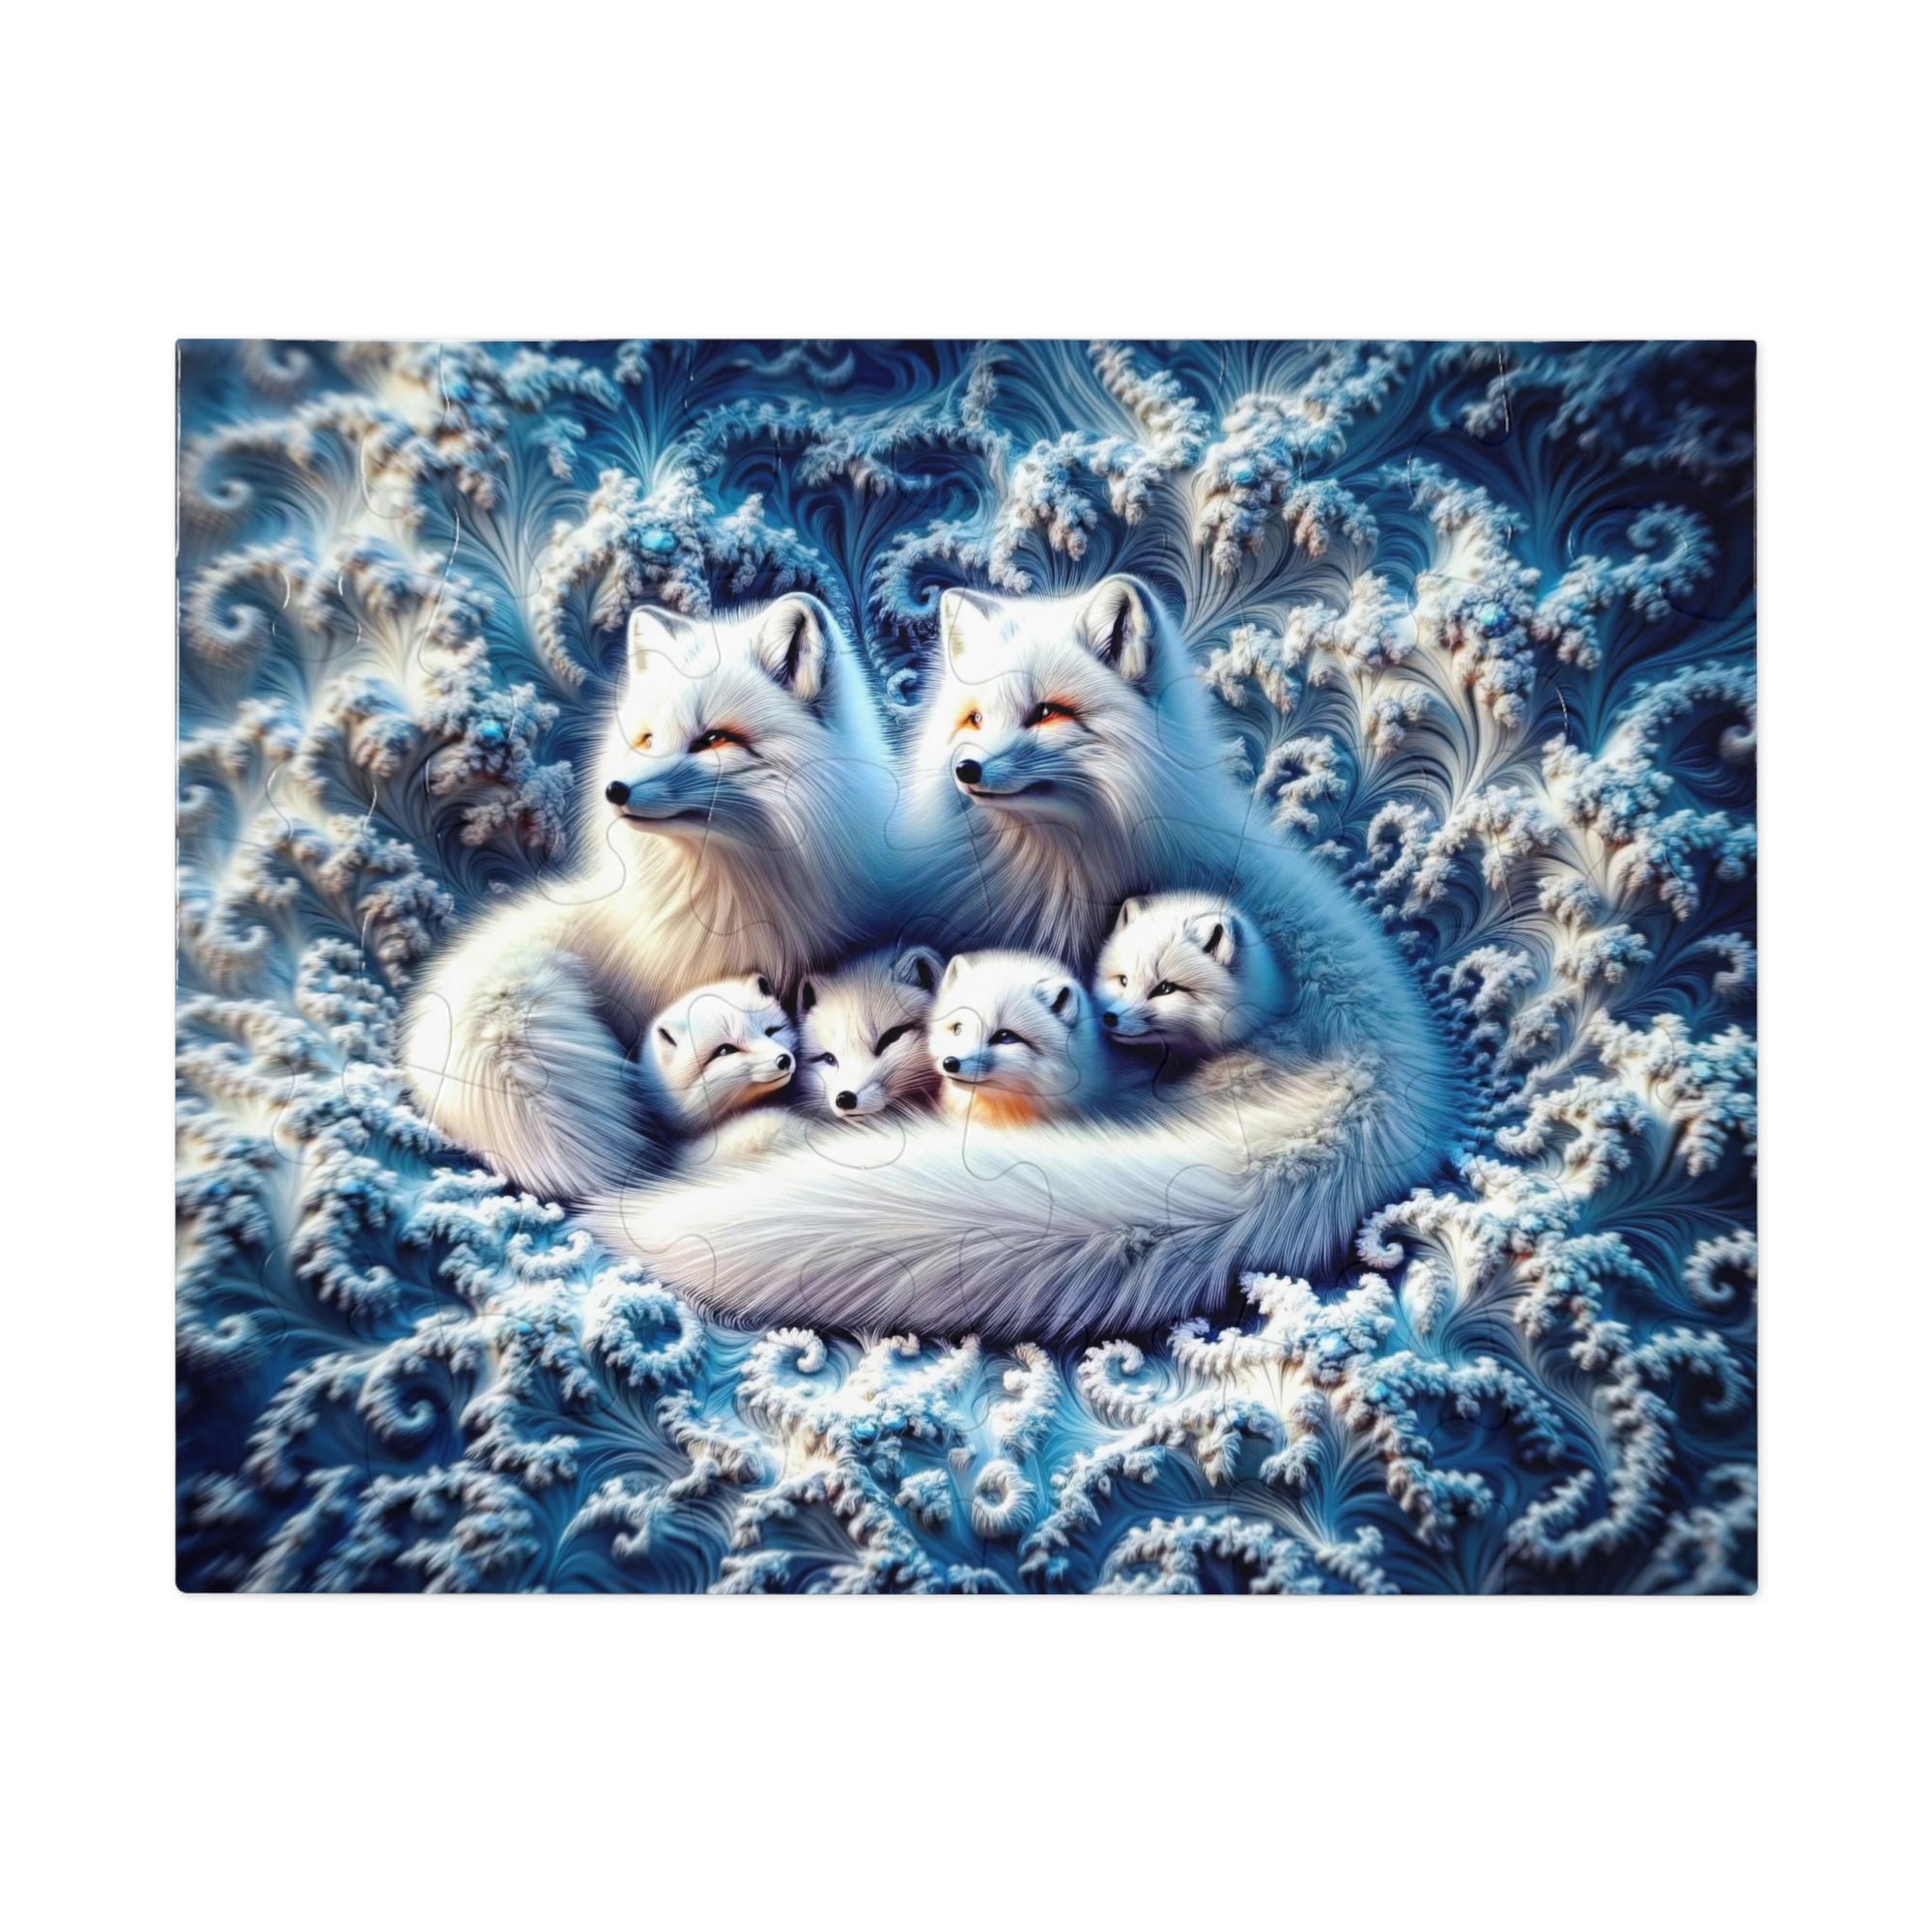 The Foxes of Fractal Valley Puzzle